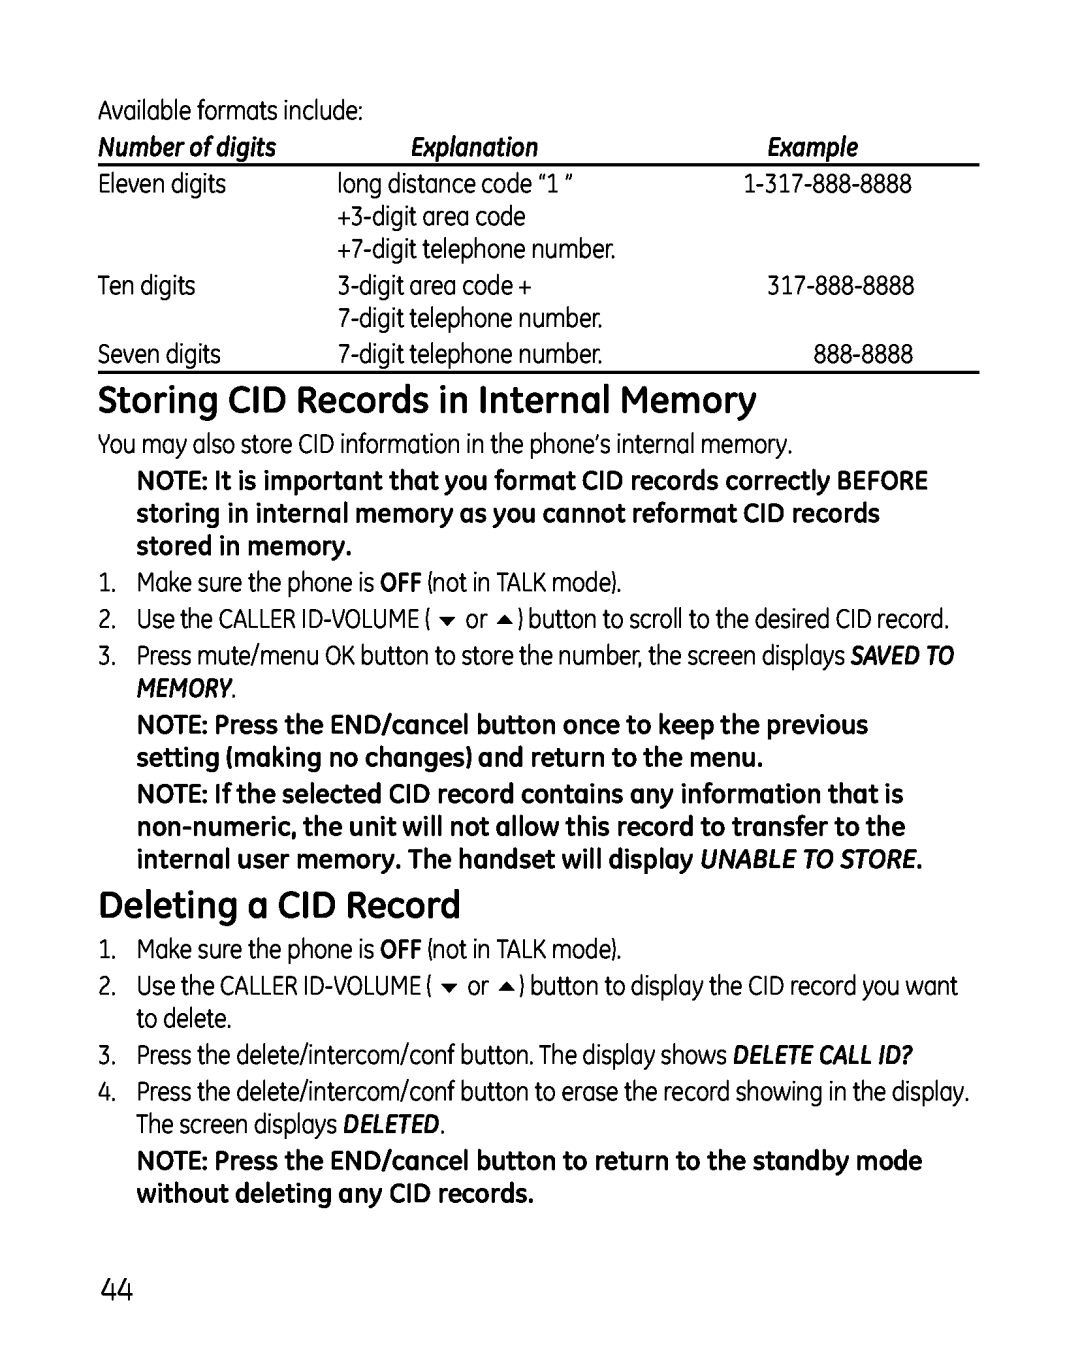 GE 0007, 881, 28801 Storing CID Records in Internal Memory, Deleting a CID Record, Number of digits, Explanation, Example 